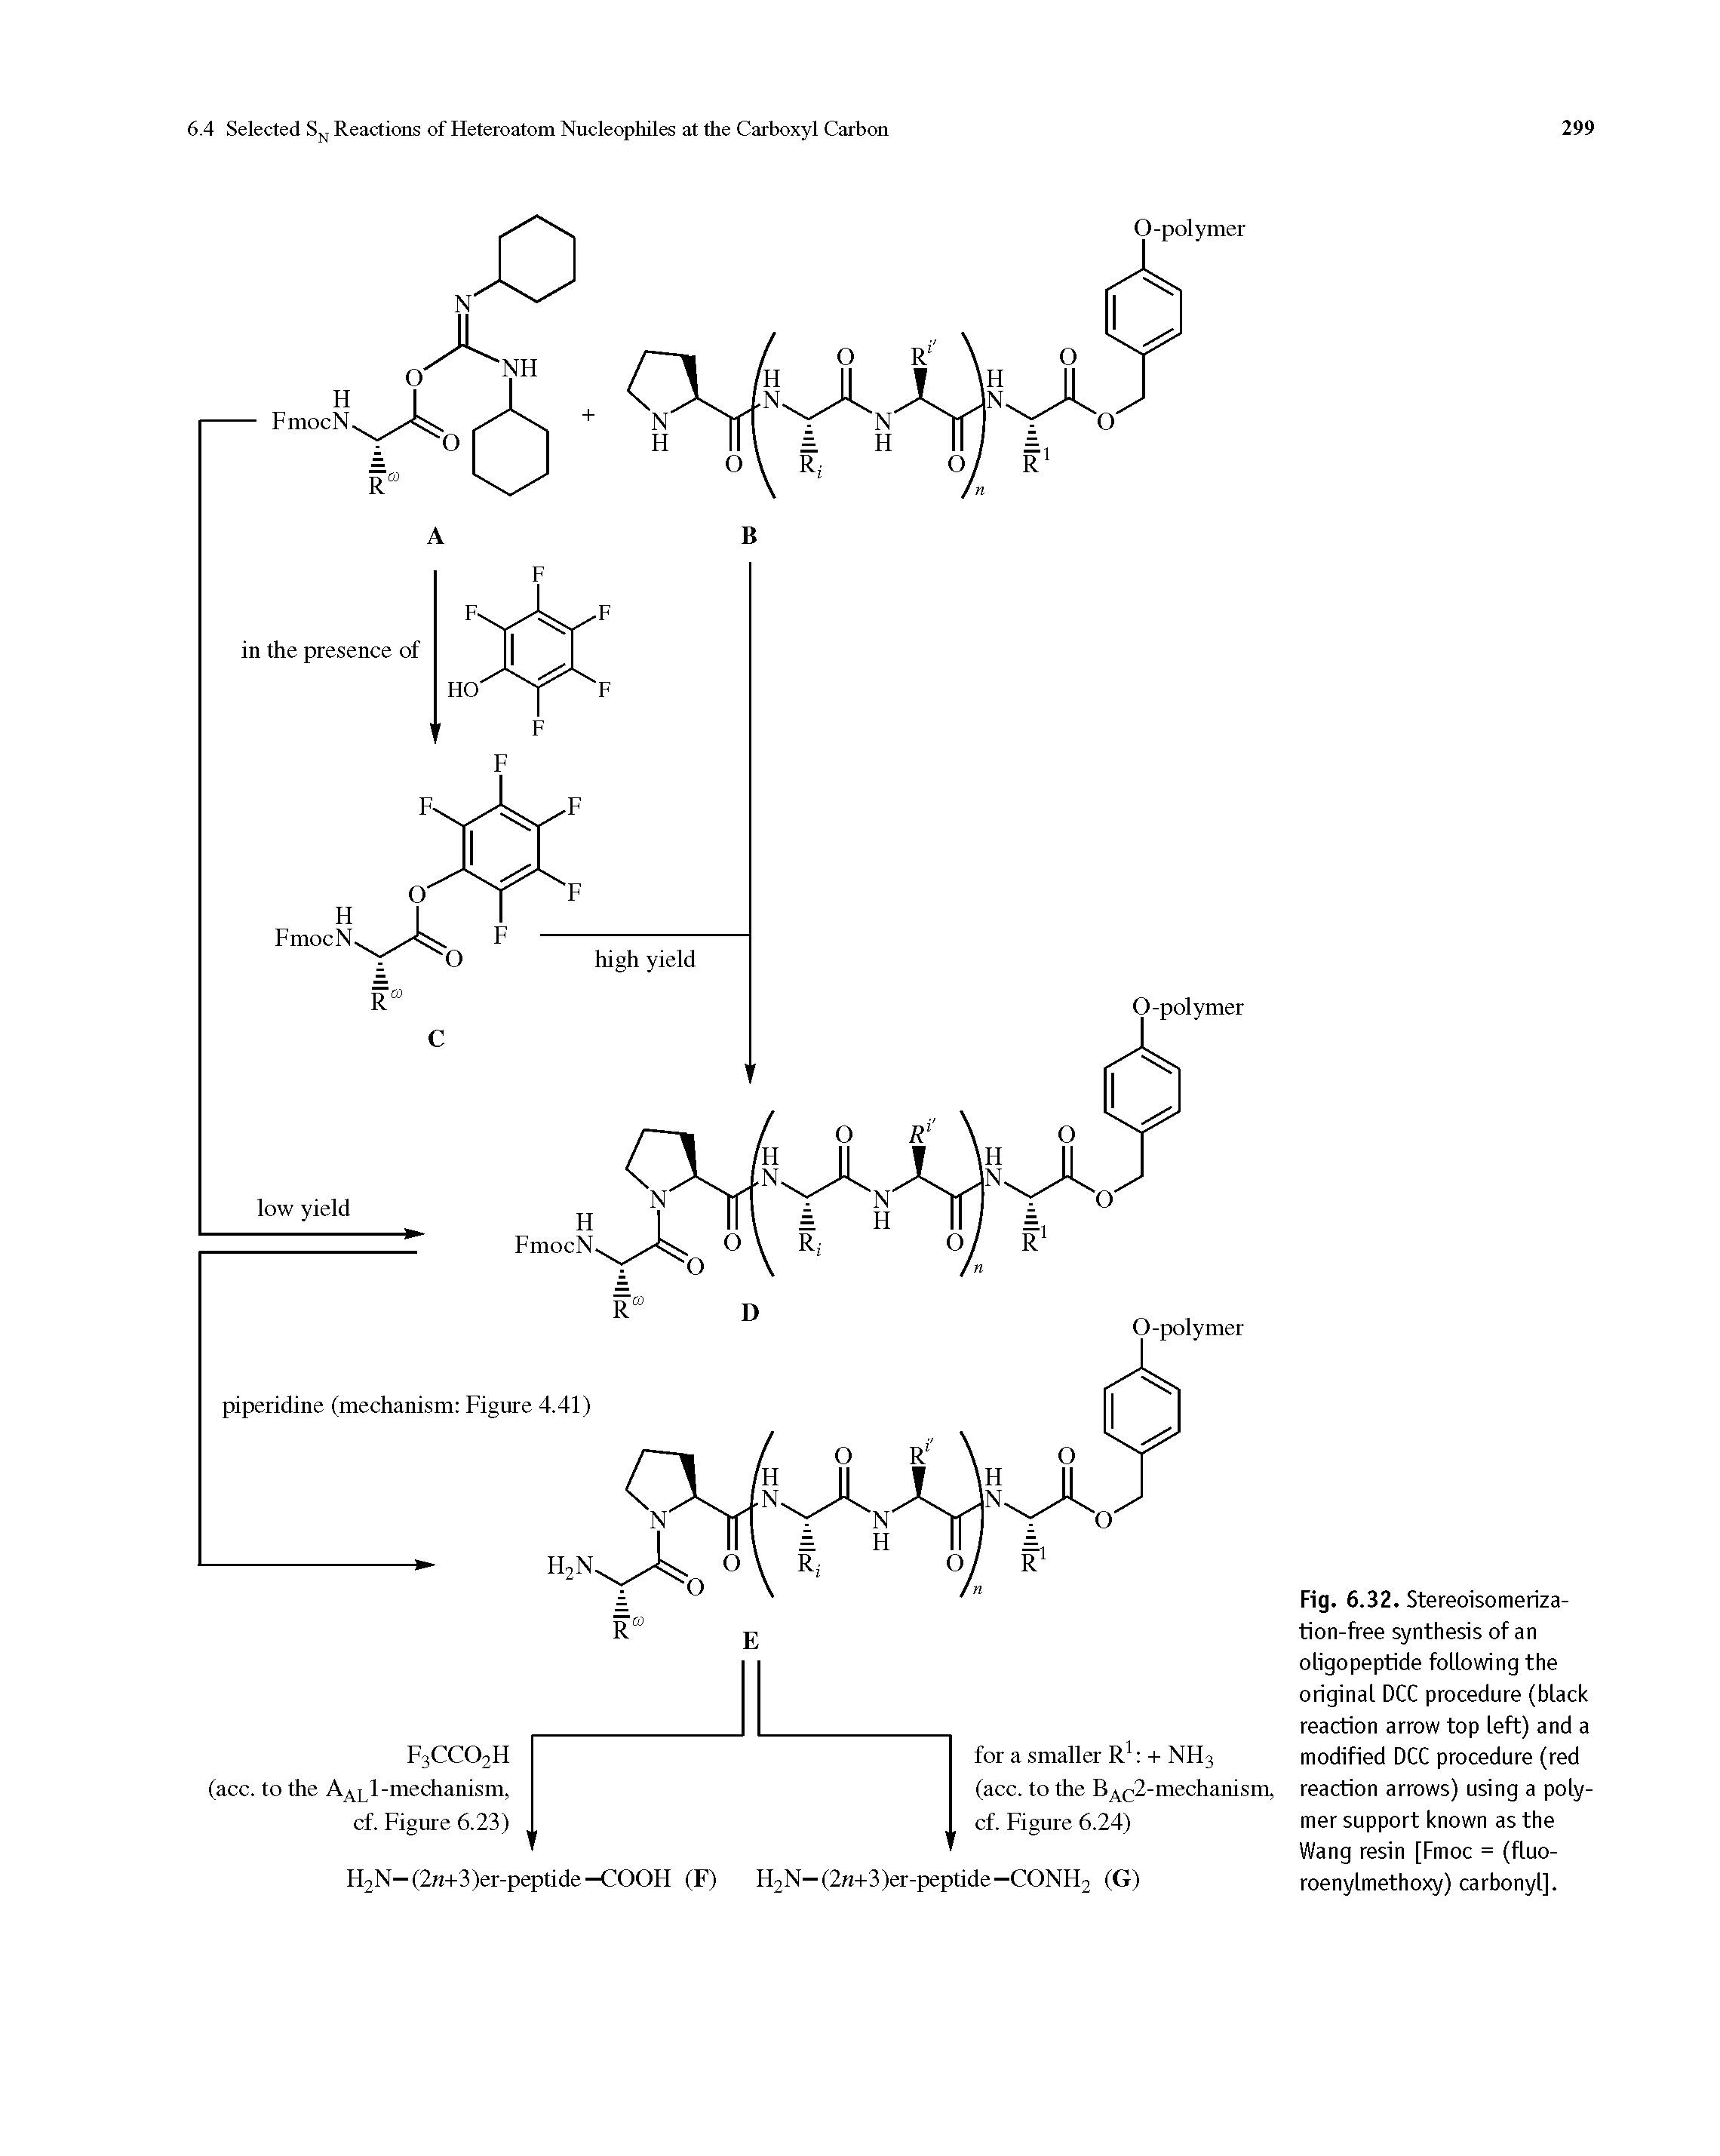 Fig. 6.32. Stereoisomeriza-tion-free synthesis of an oligopeptide following the original DCC procedure (black reaction arrow top left) and a modified DCC procedure (red reaction arrows) using a polymer support known as the Wang resin [Fmoc = (fluo-roenylmethoxy) carbonyl].